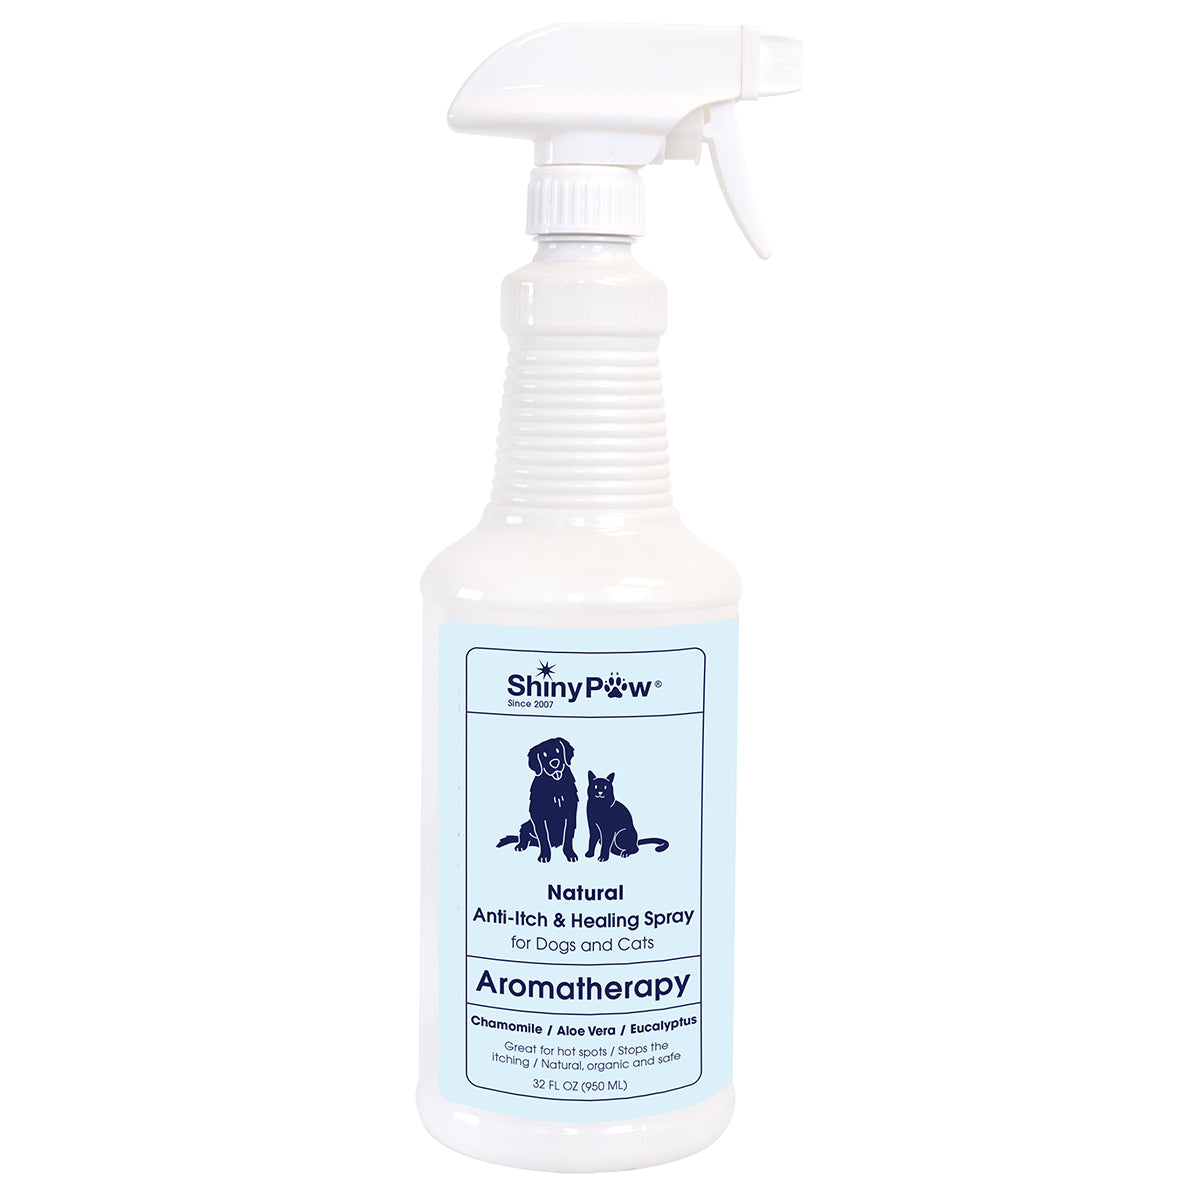 Shiny Paw Natural Anti-Itch & Healing Spray for Dogs and Cats Aromatherapy